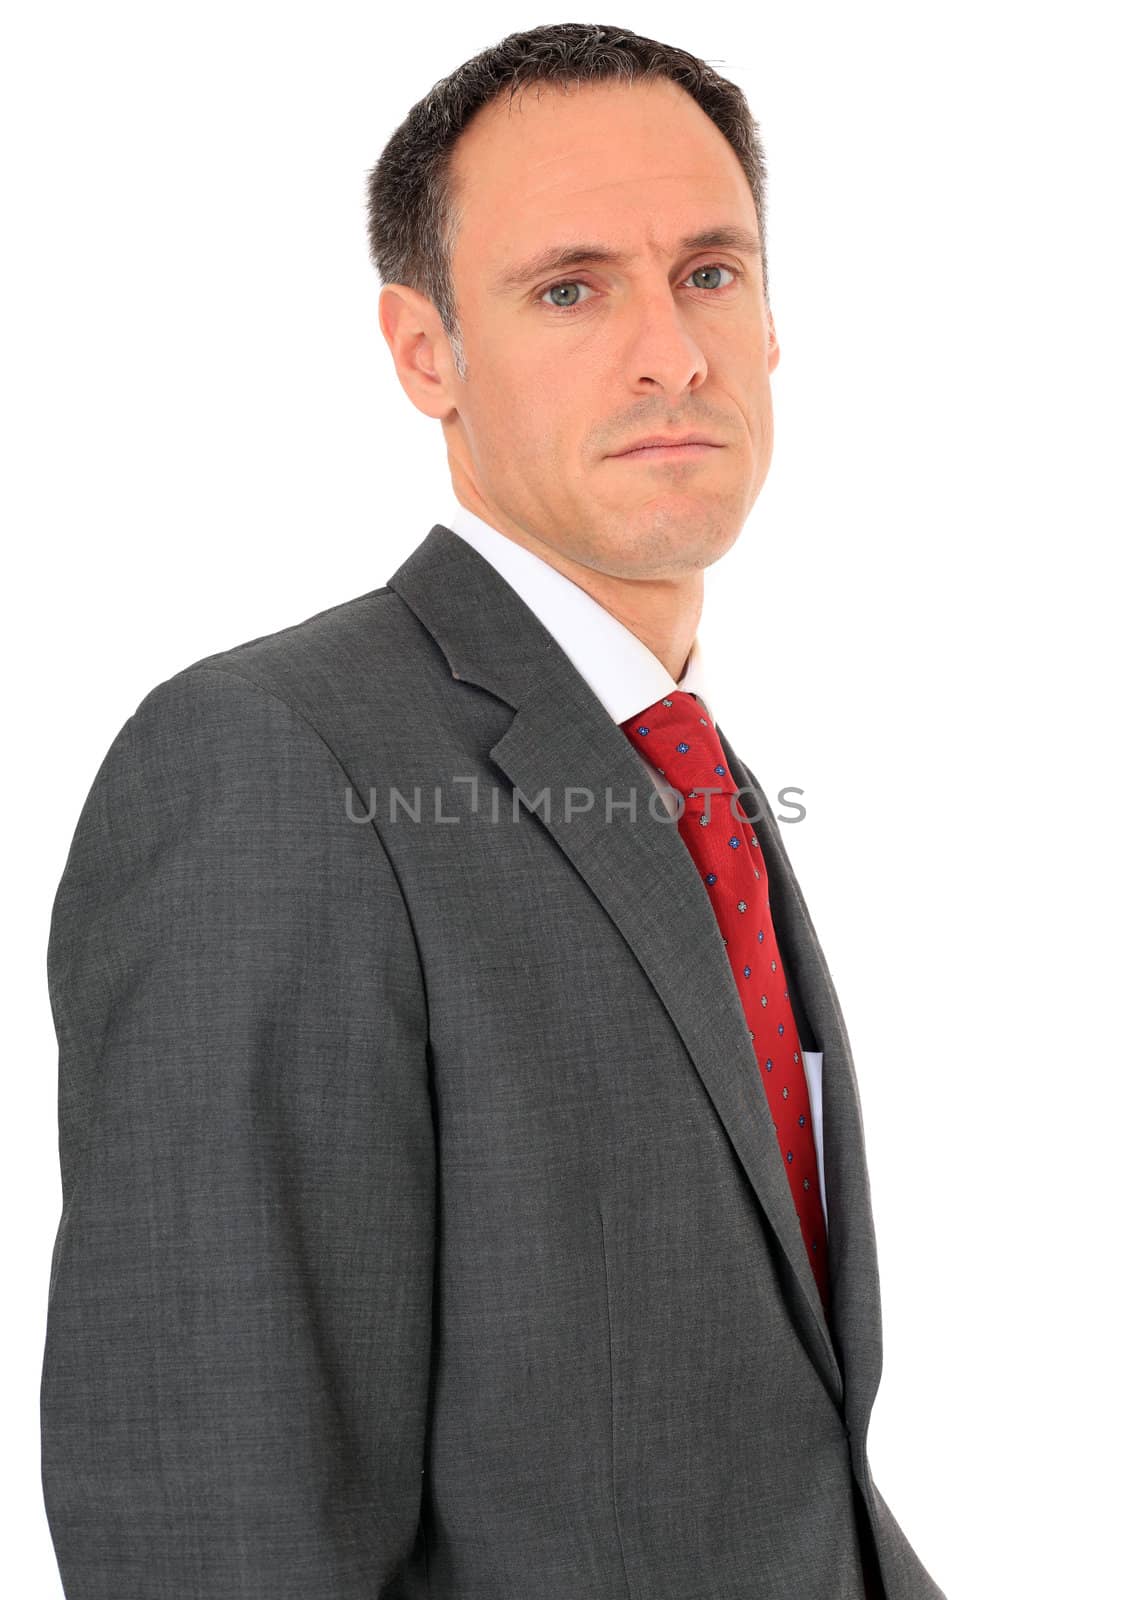 Serious looking businessman. All on white background.